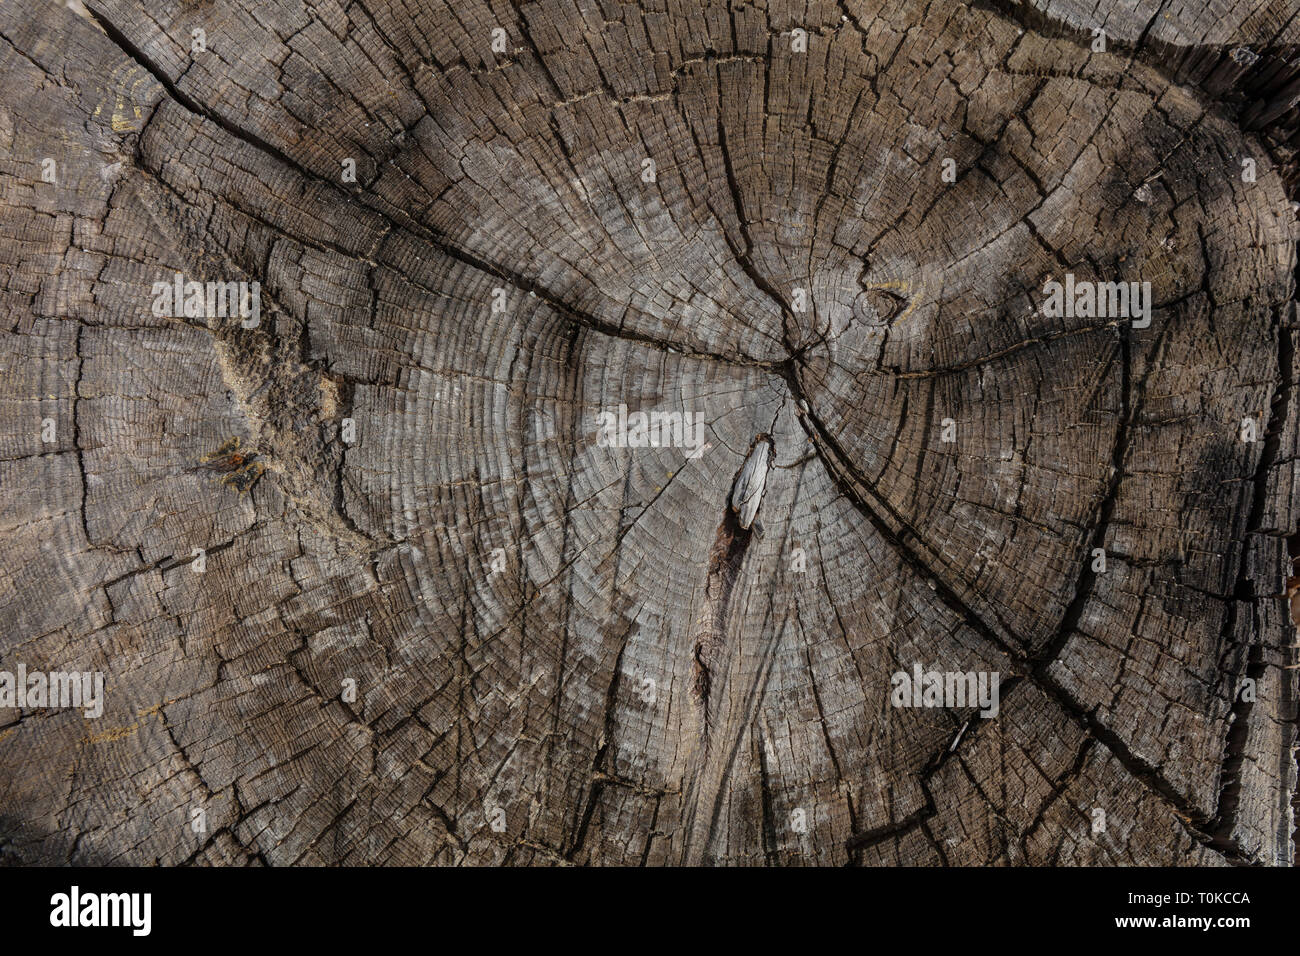 Pine tree trunk wood background, Old weathered gray color wooden stump, closeup view Stock Photo